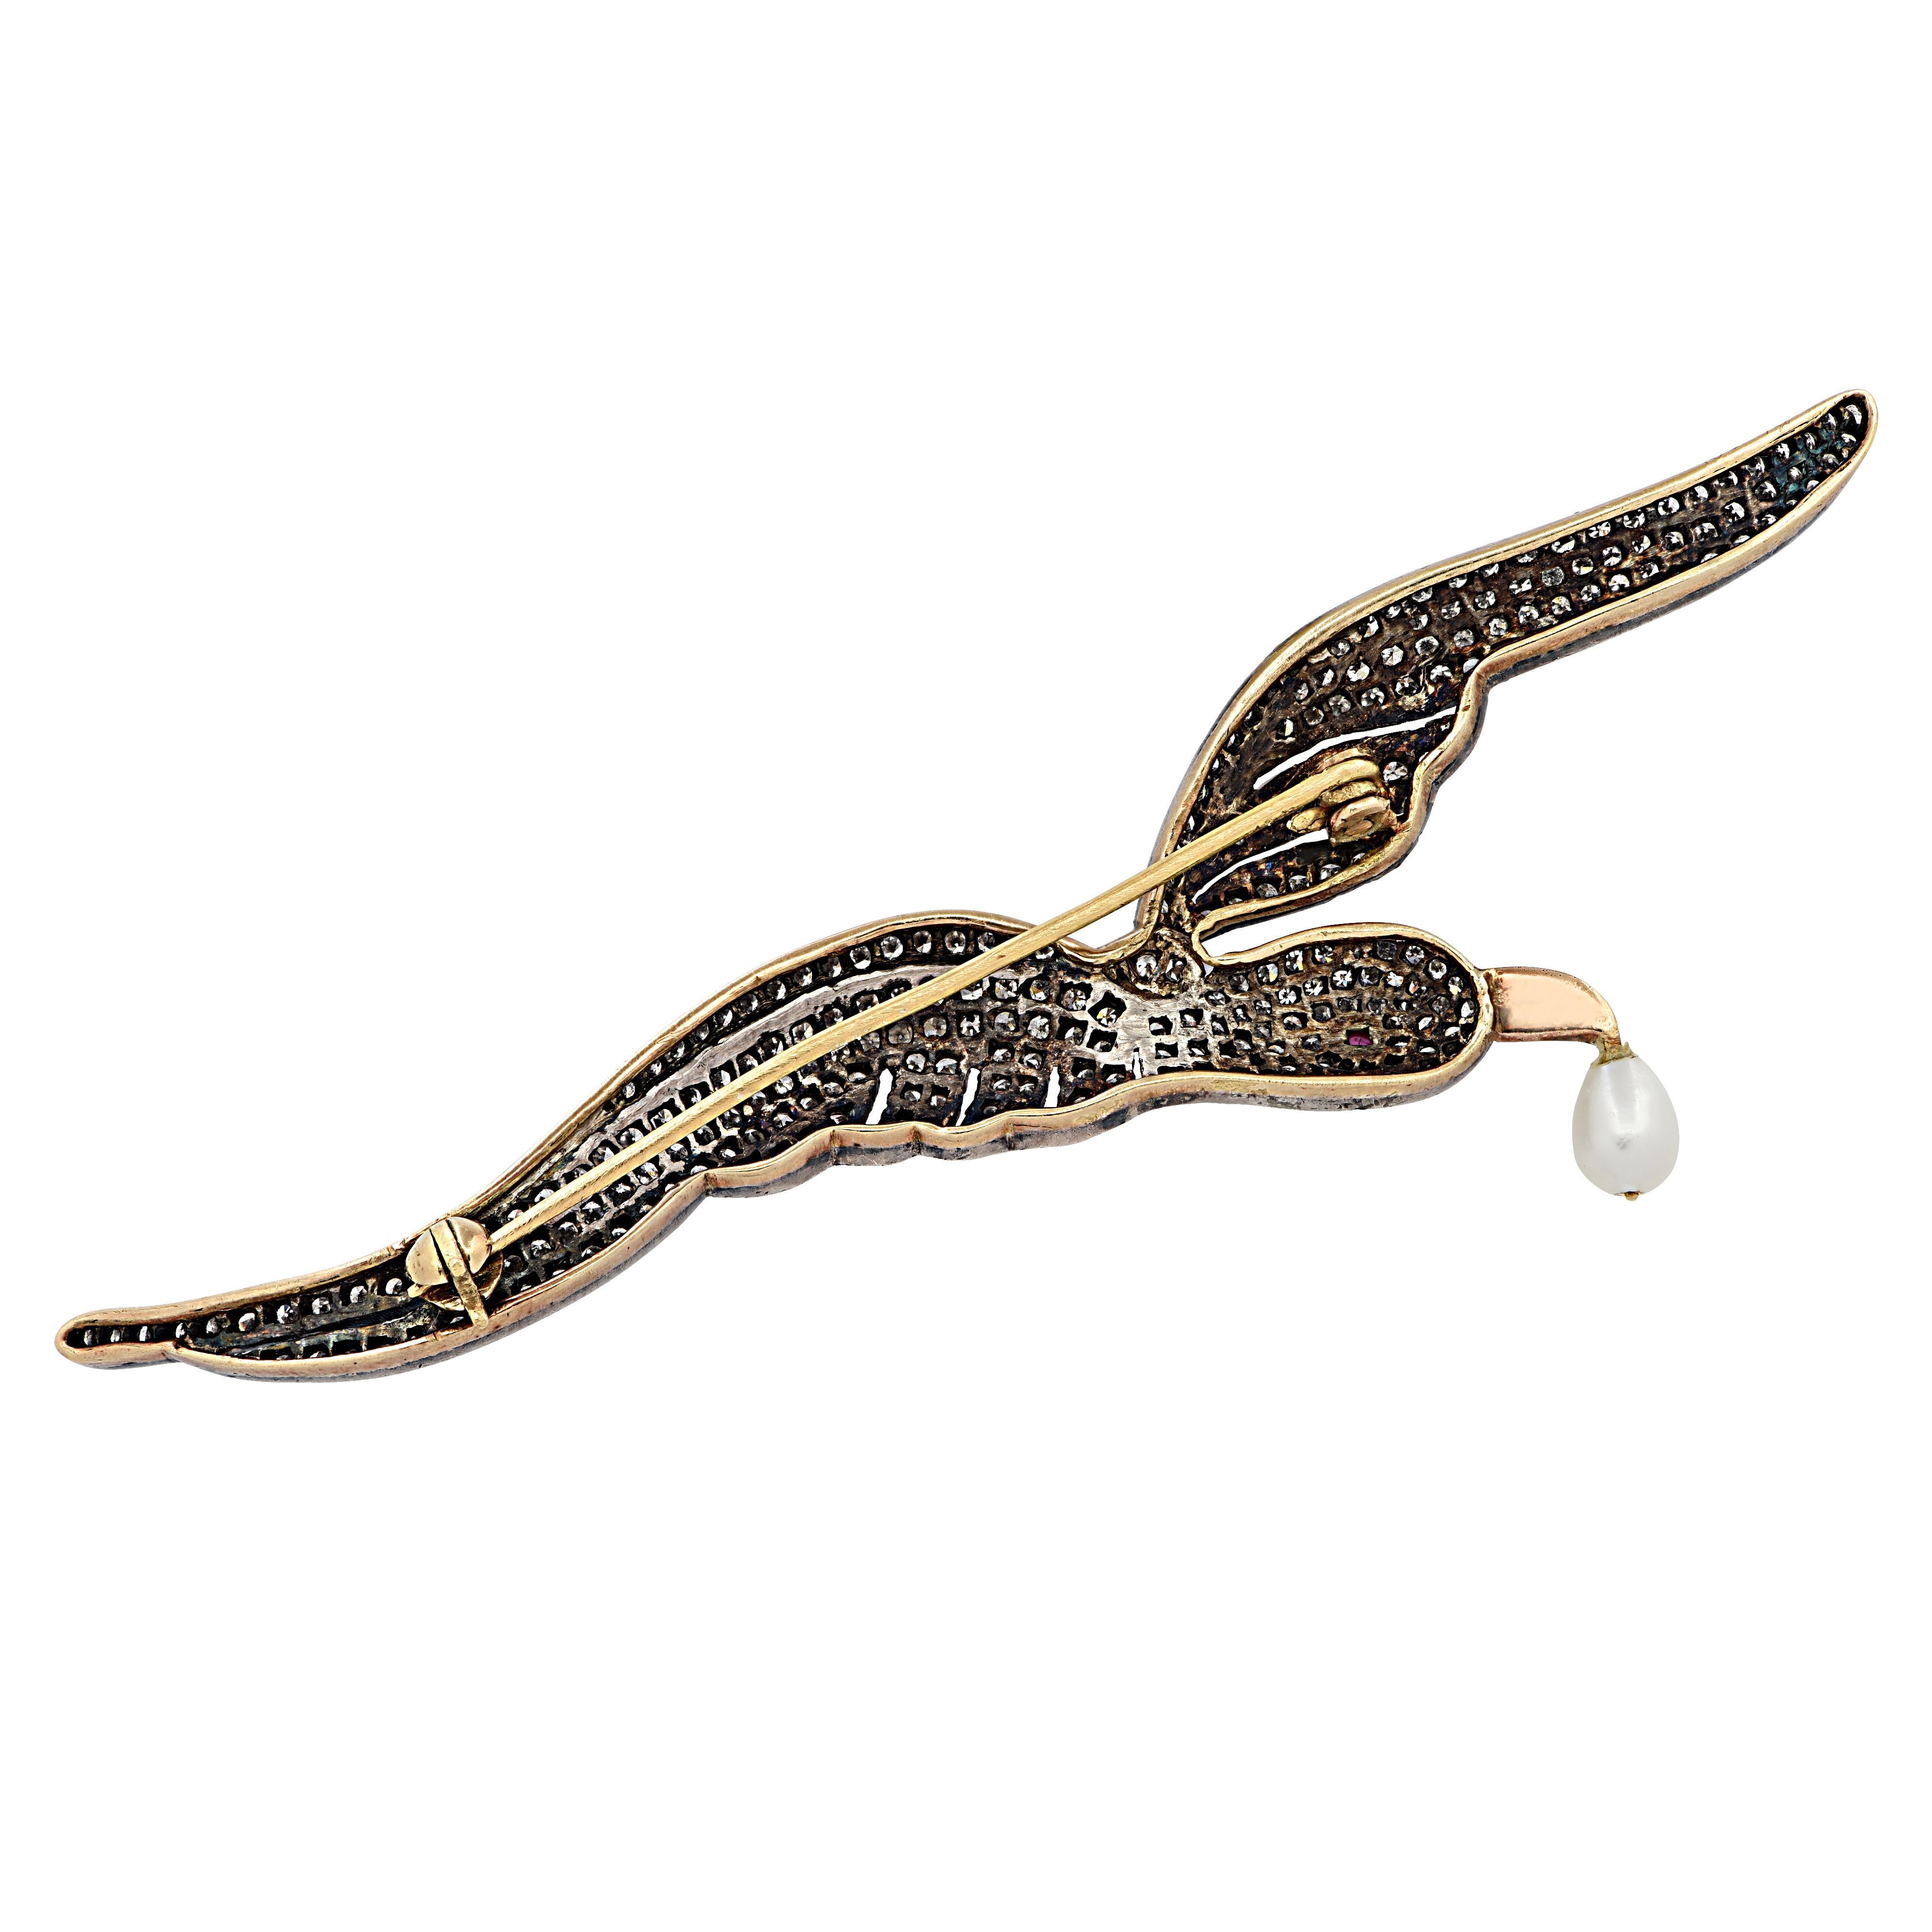 Bird Brooch Pin crafted in silver and yellow gold depicting a bird in full flight, encrusted with 270 single cut diamonds weighing approximately 3 carats total, H-J color, SI -I1 clarity. The bird, detailed with milgrain and open metal work, has a